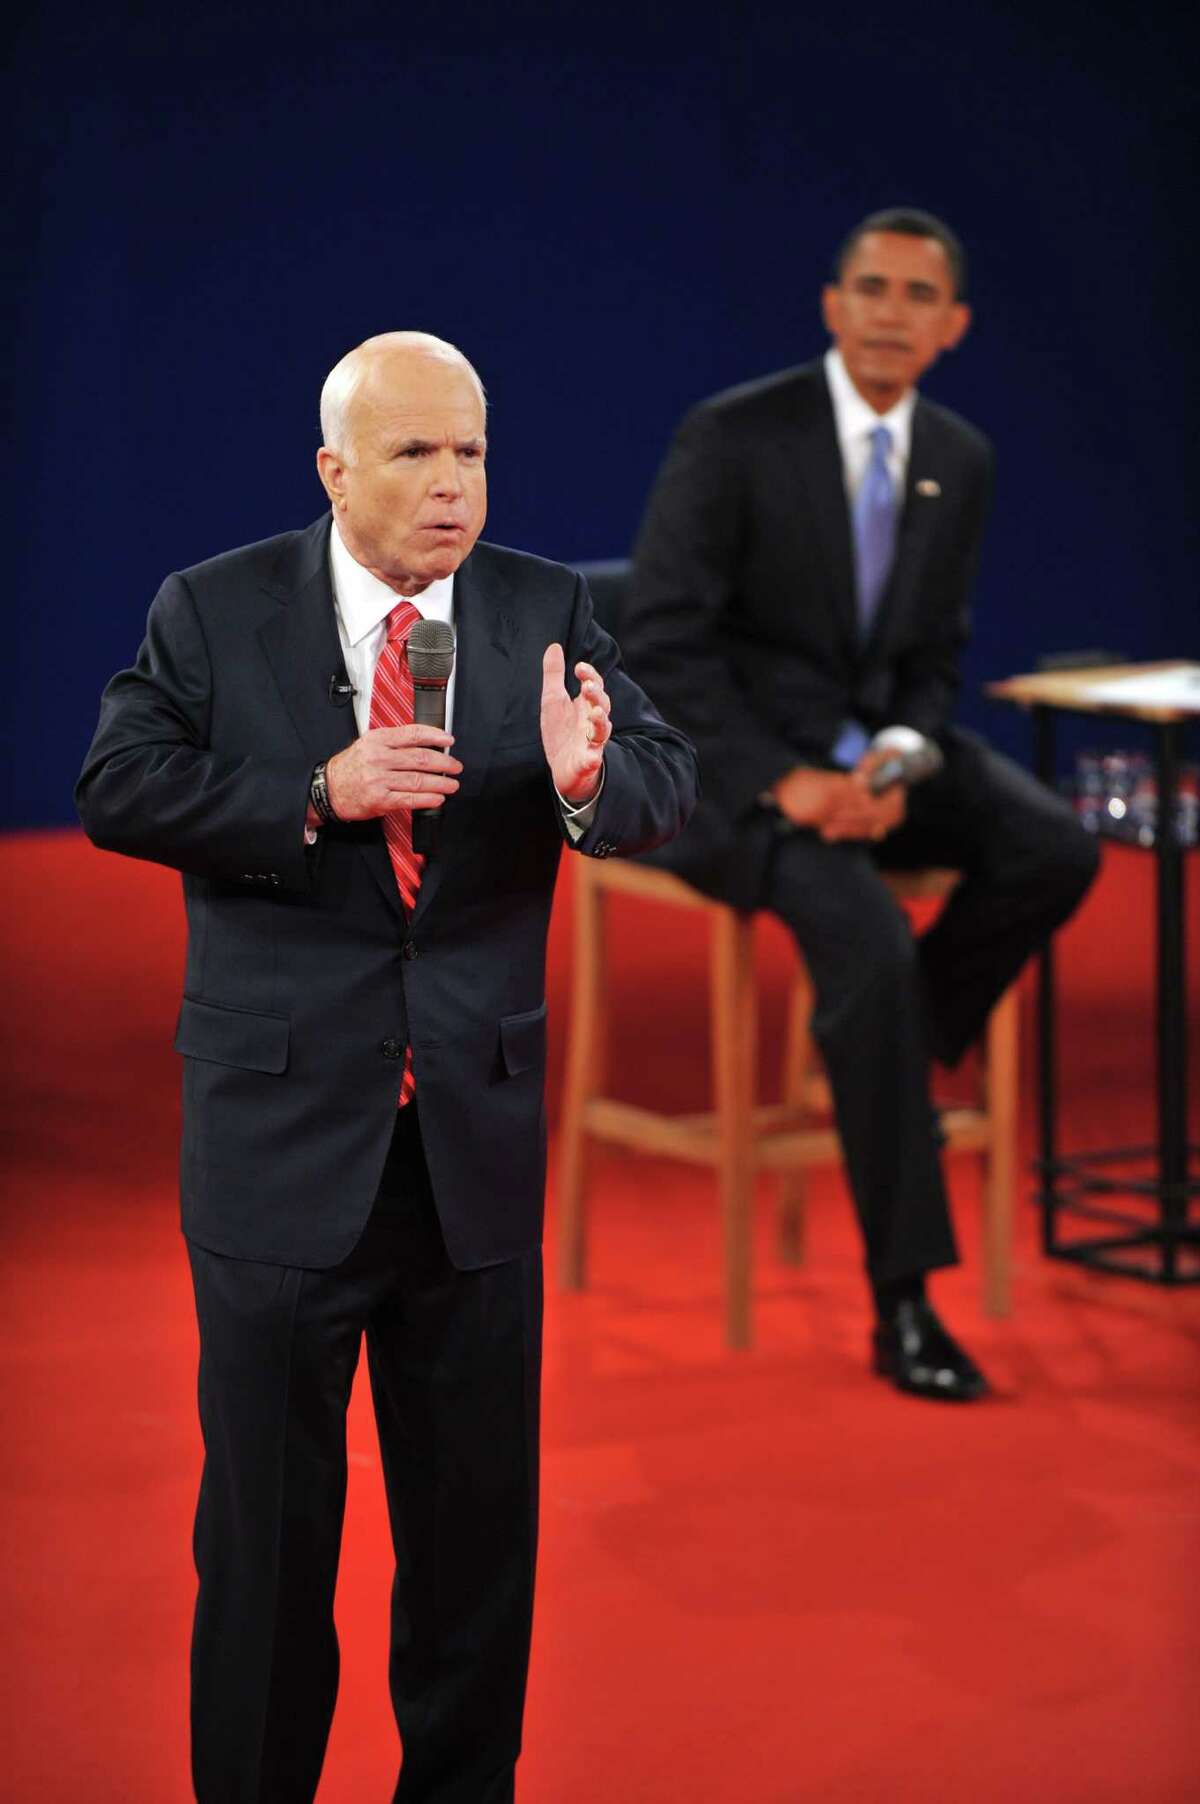 Republican John McCain makes a point as Democrat Barack Obama (R) listens during their second presidential debate at Belmont University's Curb Rvent Center on October 7, 2008 in Nashville, Tennessee. AFP PHOTO JIM WATSON (Photo credit should read JIM WATSON/AFP/Getty Images)